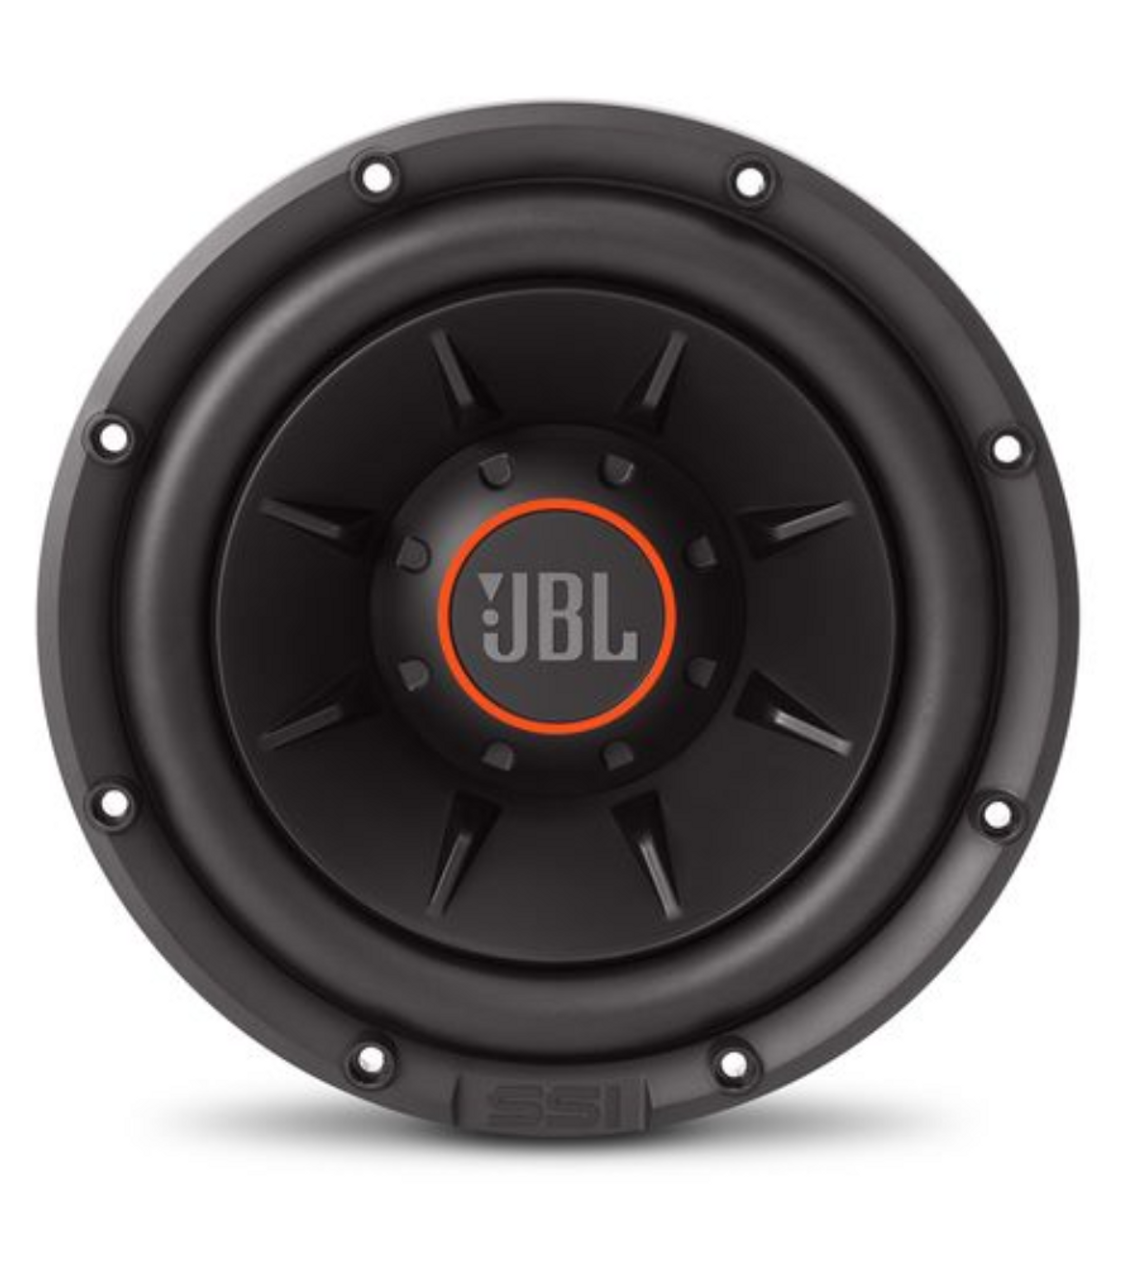 JBL 12 Ported with Built-In 12 S-1224 In-Car Entertainment Parts Accessories greatrace.com